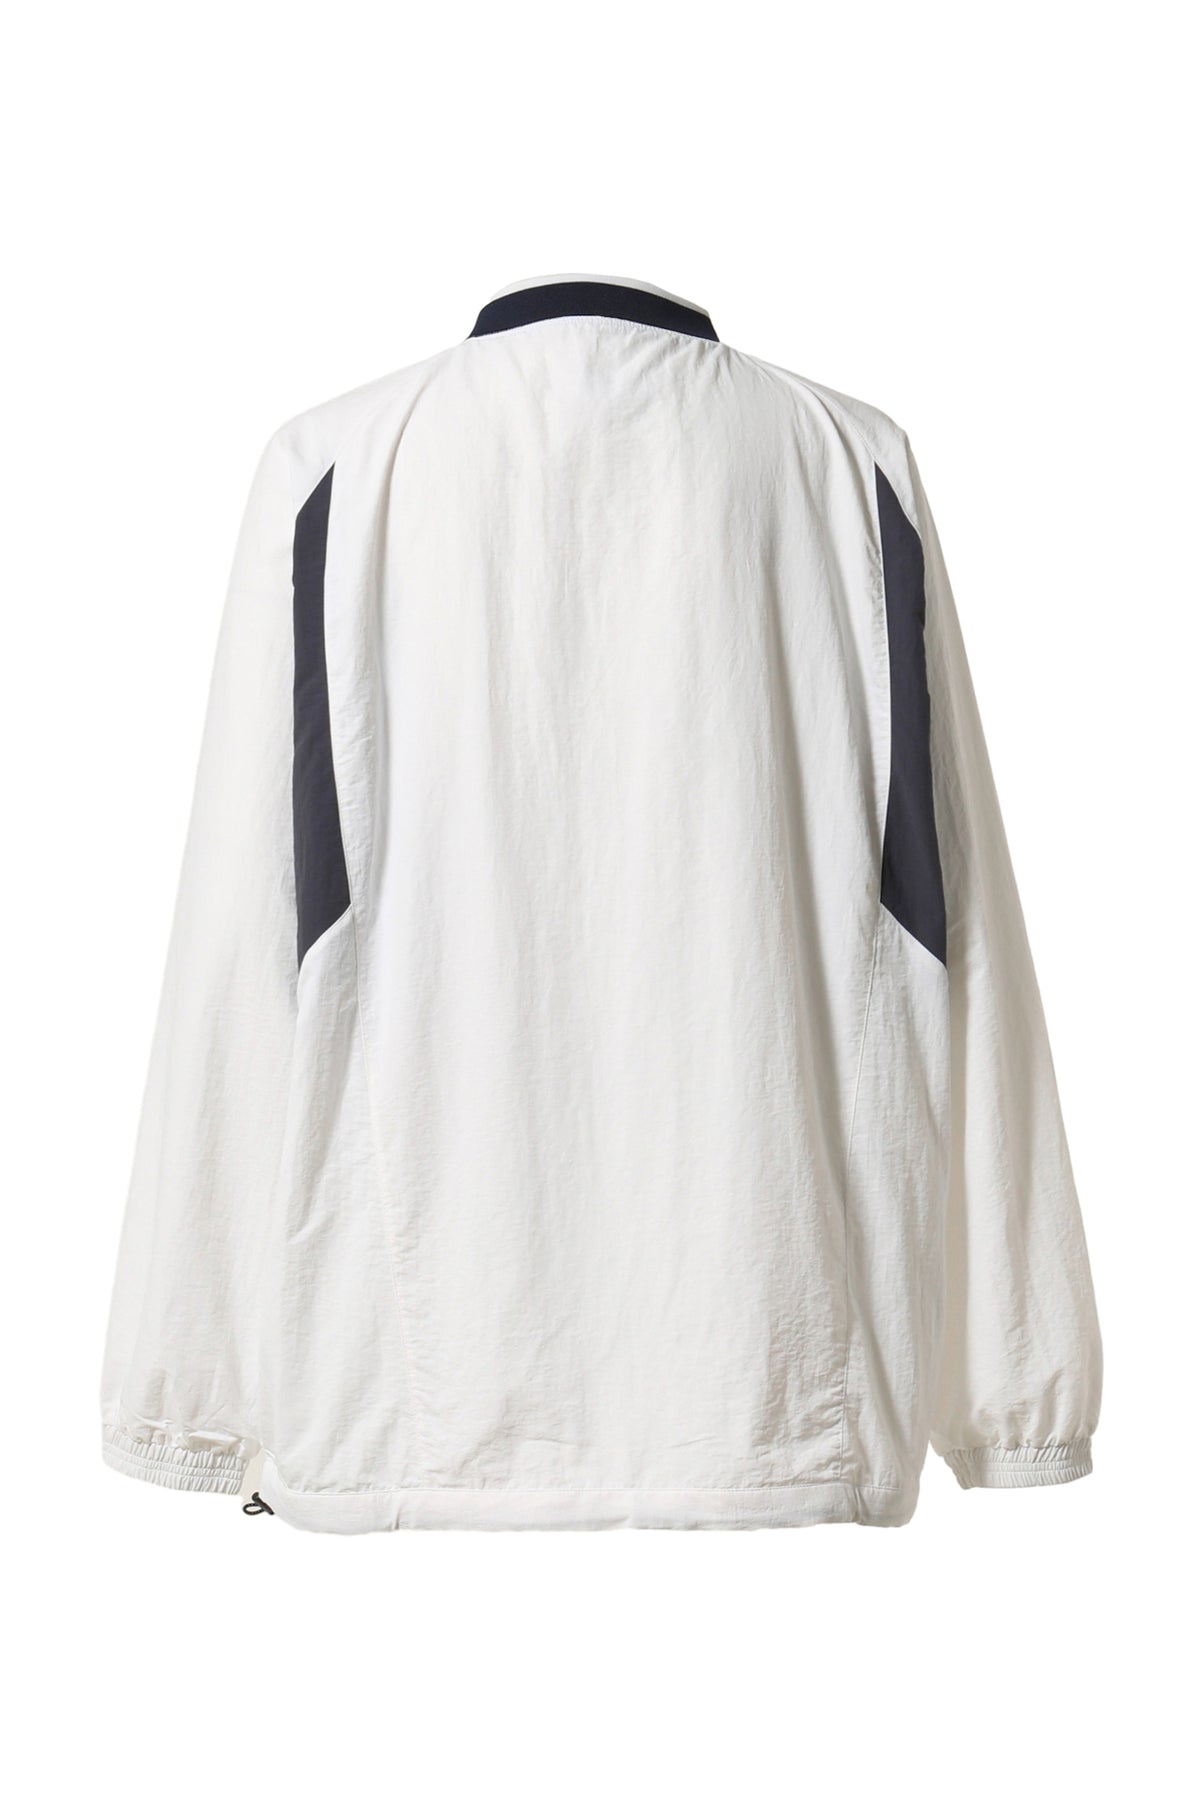 Martine Rose SPORTS PULLOVER / WHT NVY